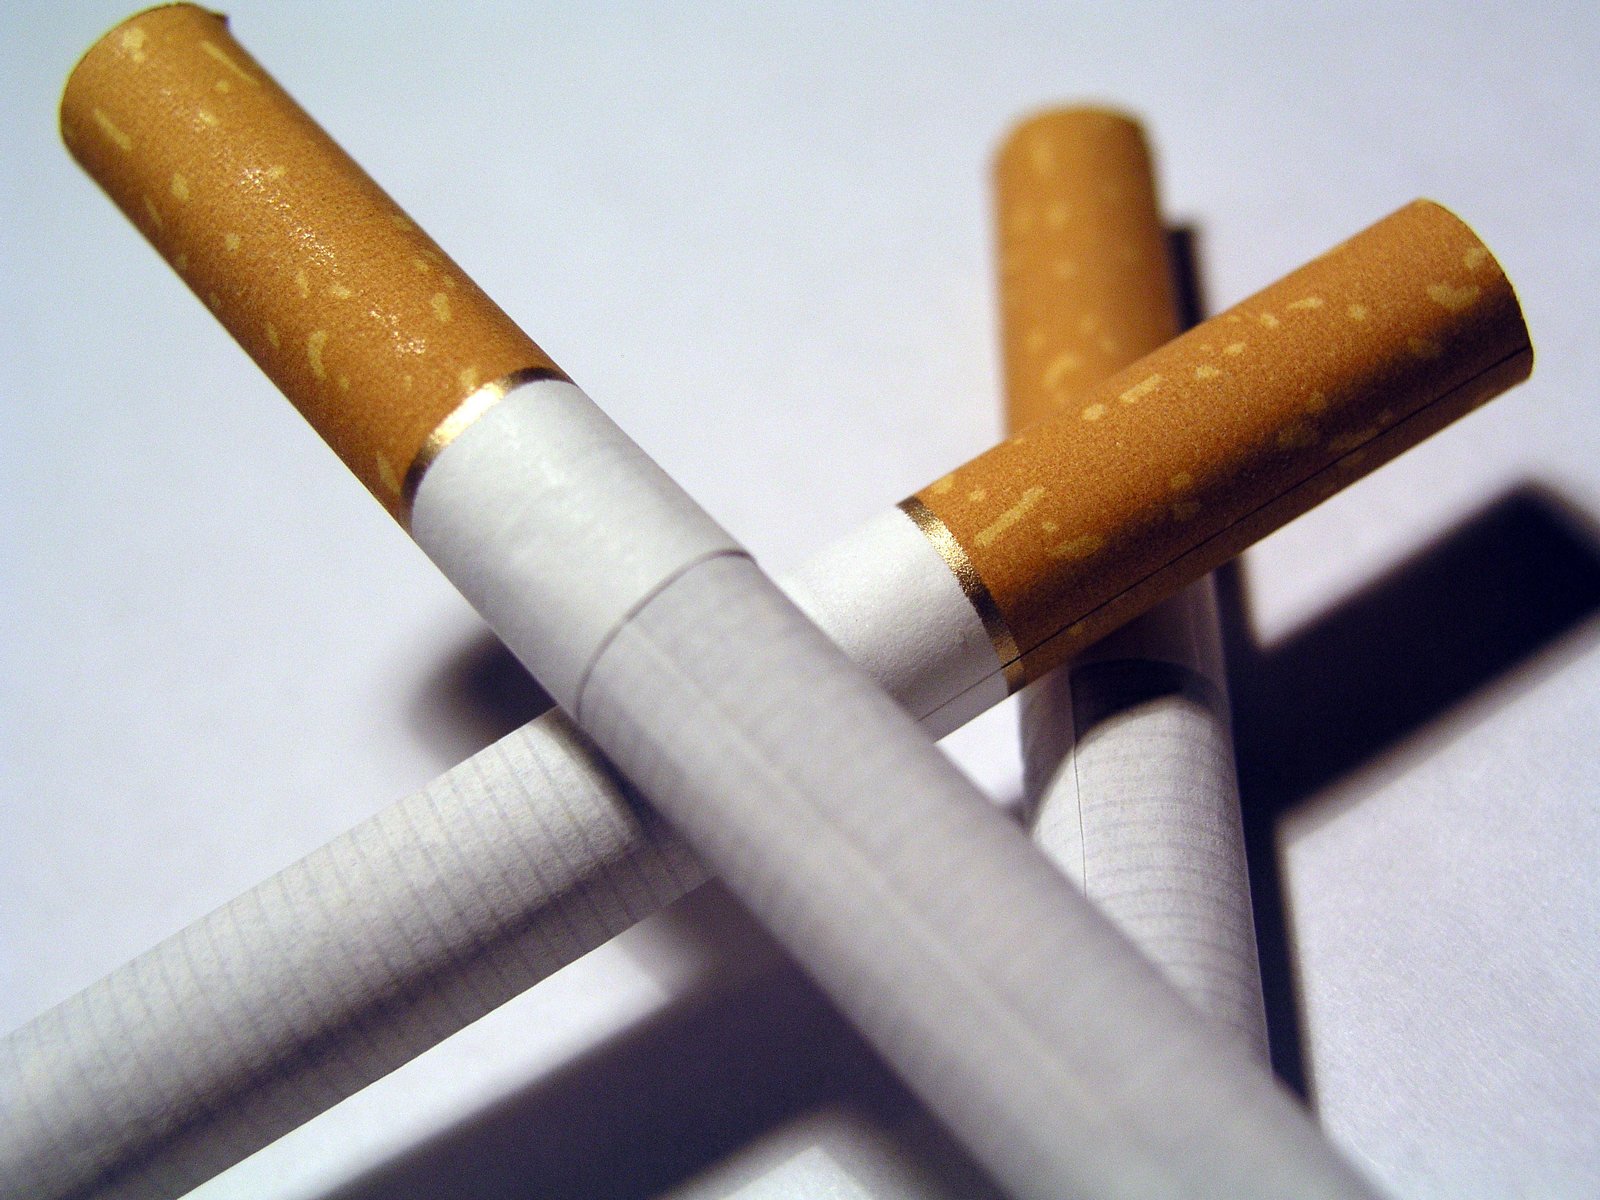 a number of cigarettes on a table